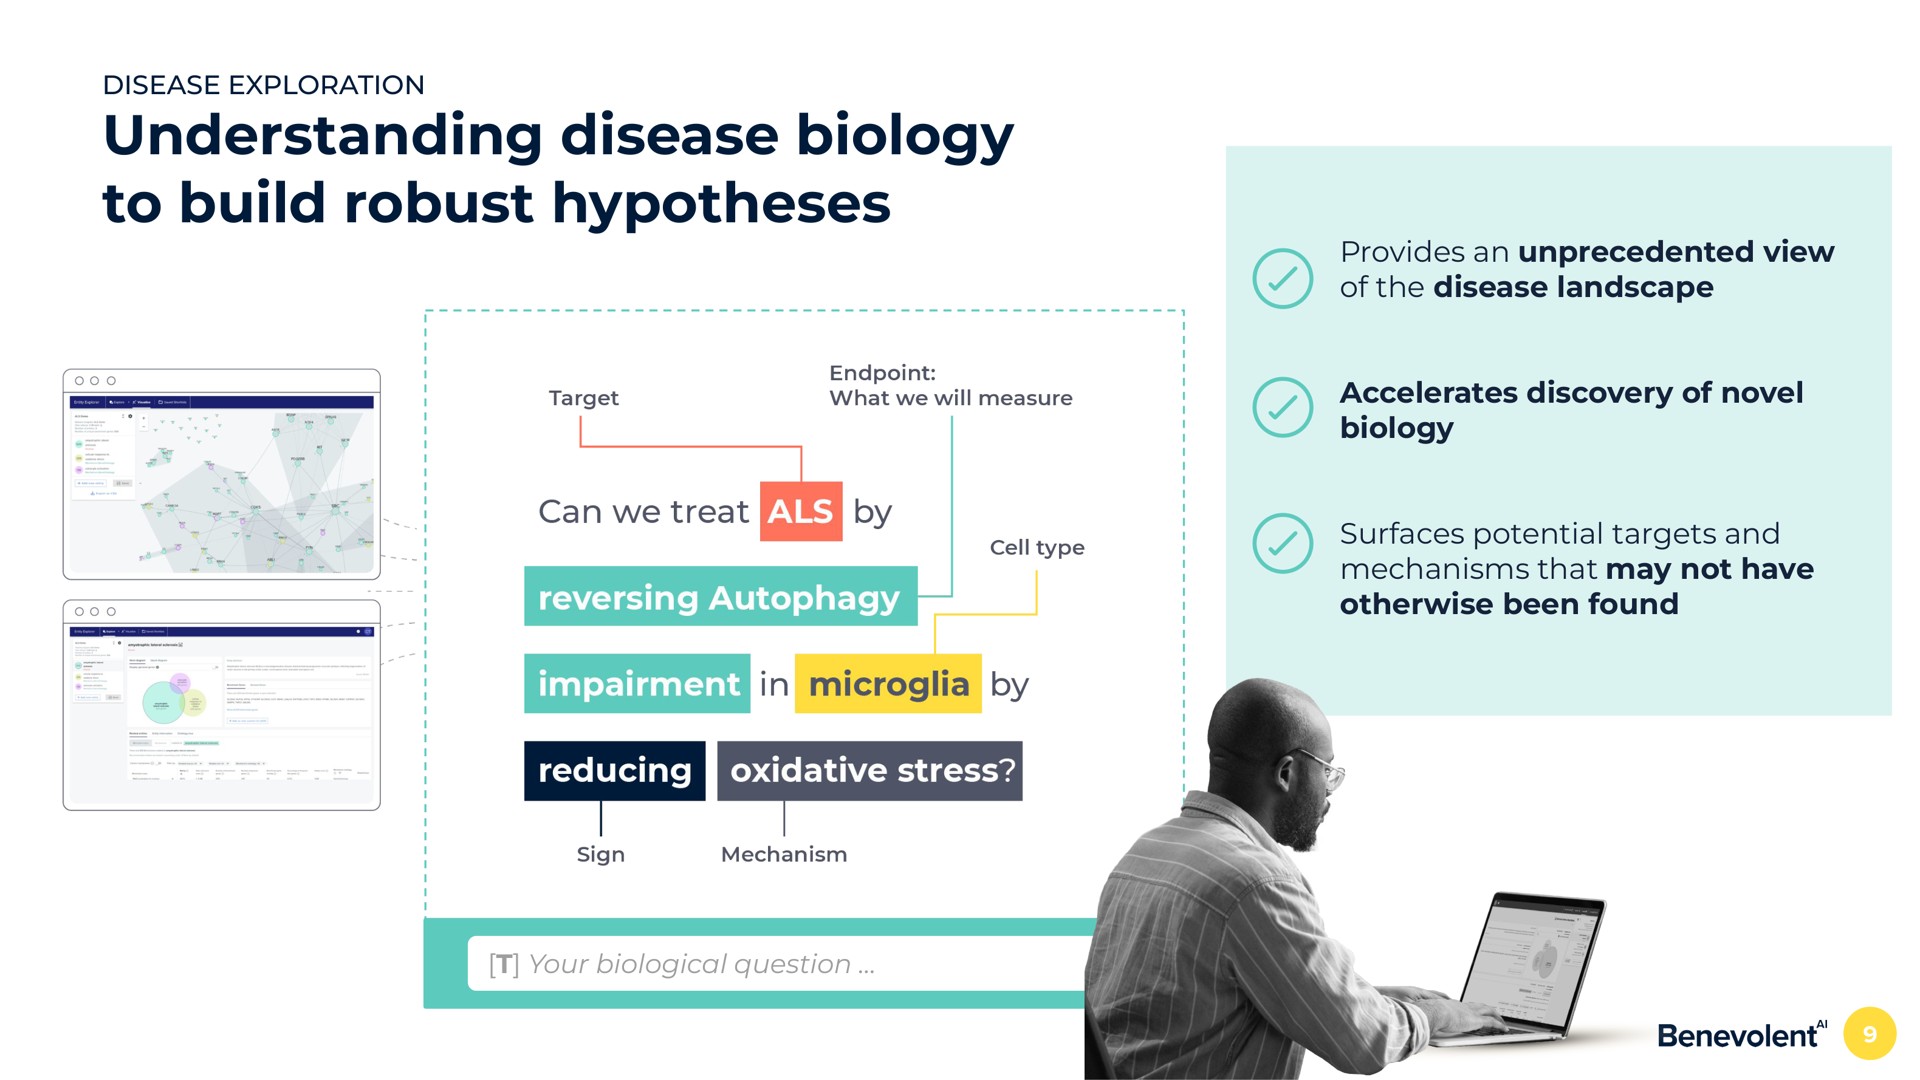 understanding disease biology to build robust hypotheses provides an unprecedented view of the disease landscape accelerates discovery of novel biology surfaces potential targets and mechanisms that may not have otherwise been found | BenevolentAI